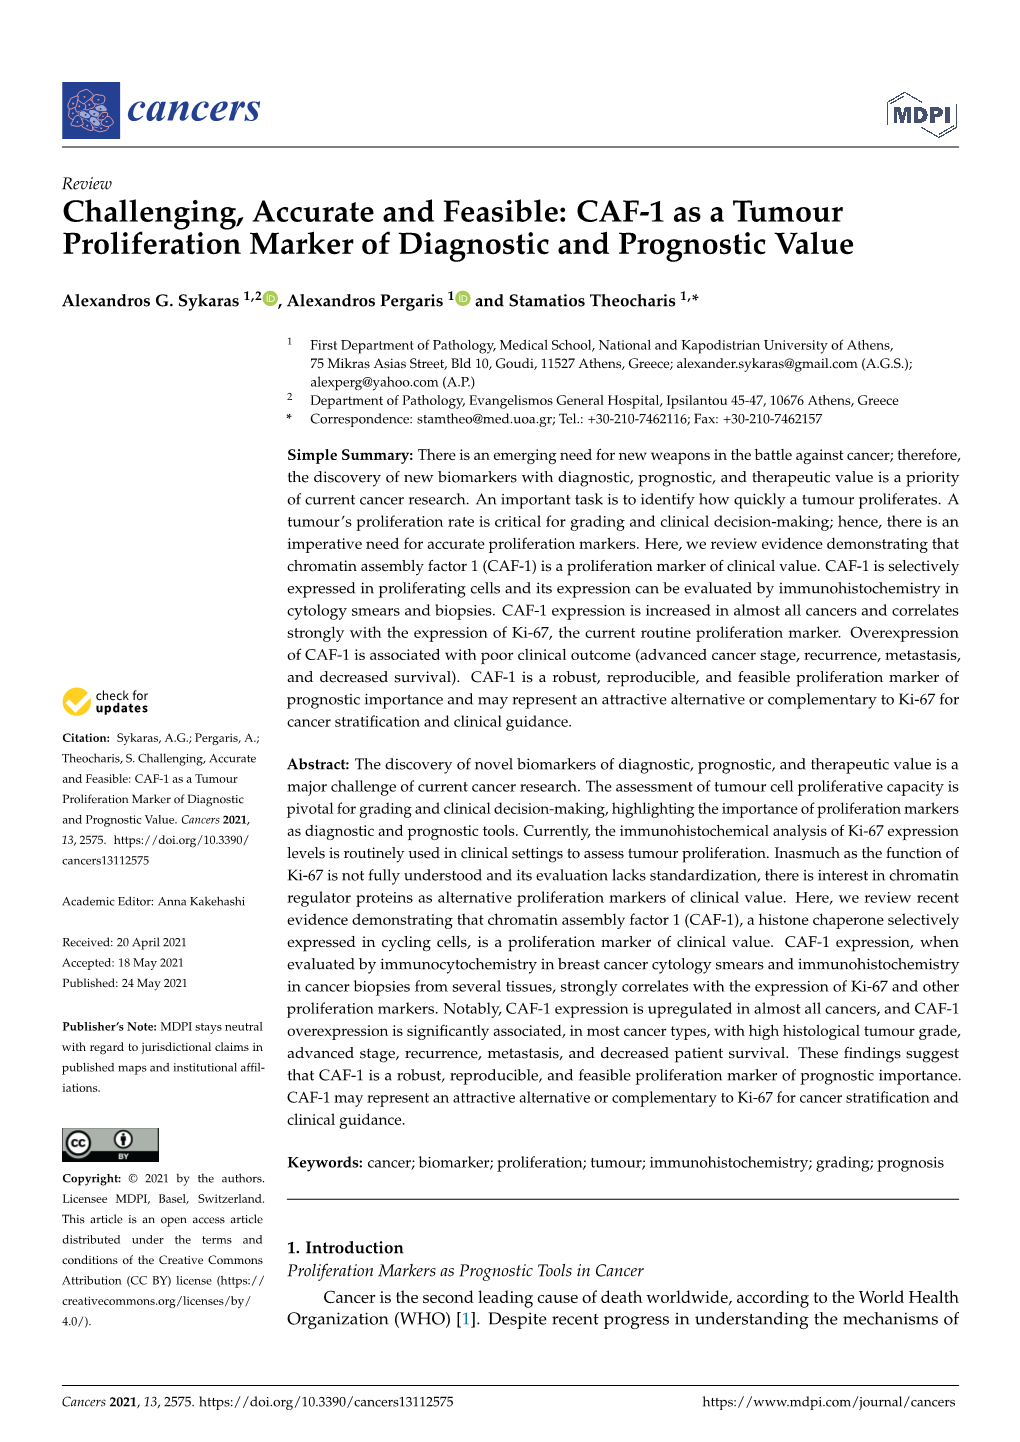 CAF-1 As a Tumour Proliferation Marker of Diagnostic and Prognostic Value